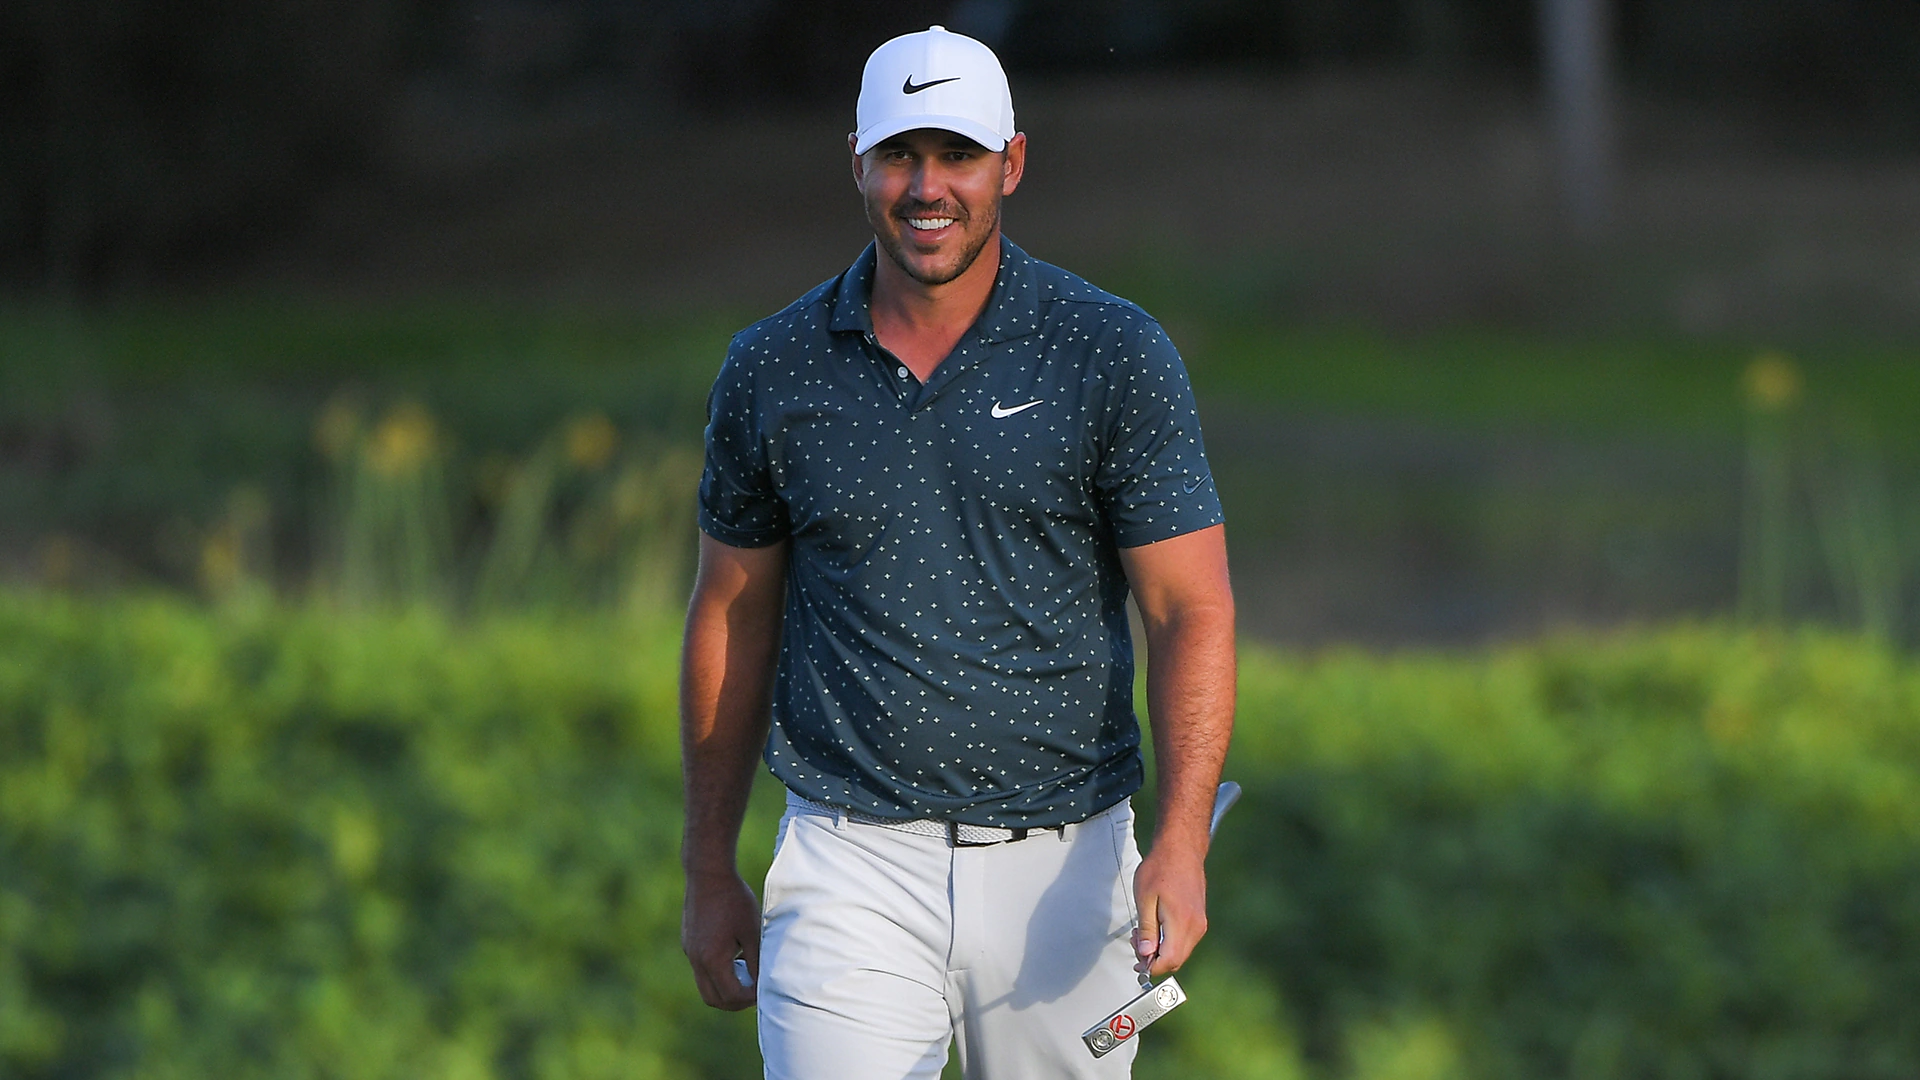 Brooks Koepka practices Sunday at Augusta National, ready for Masters